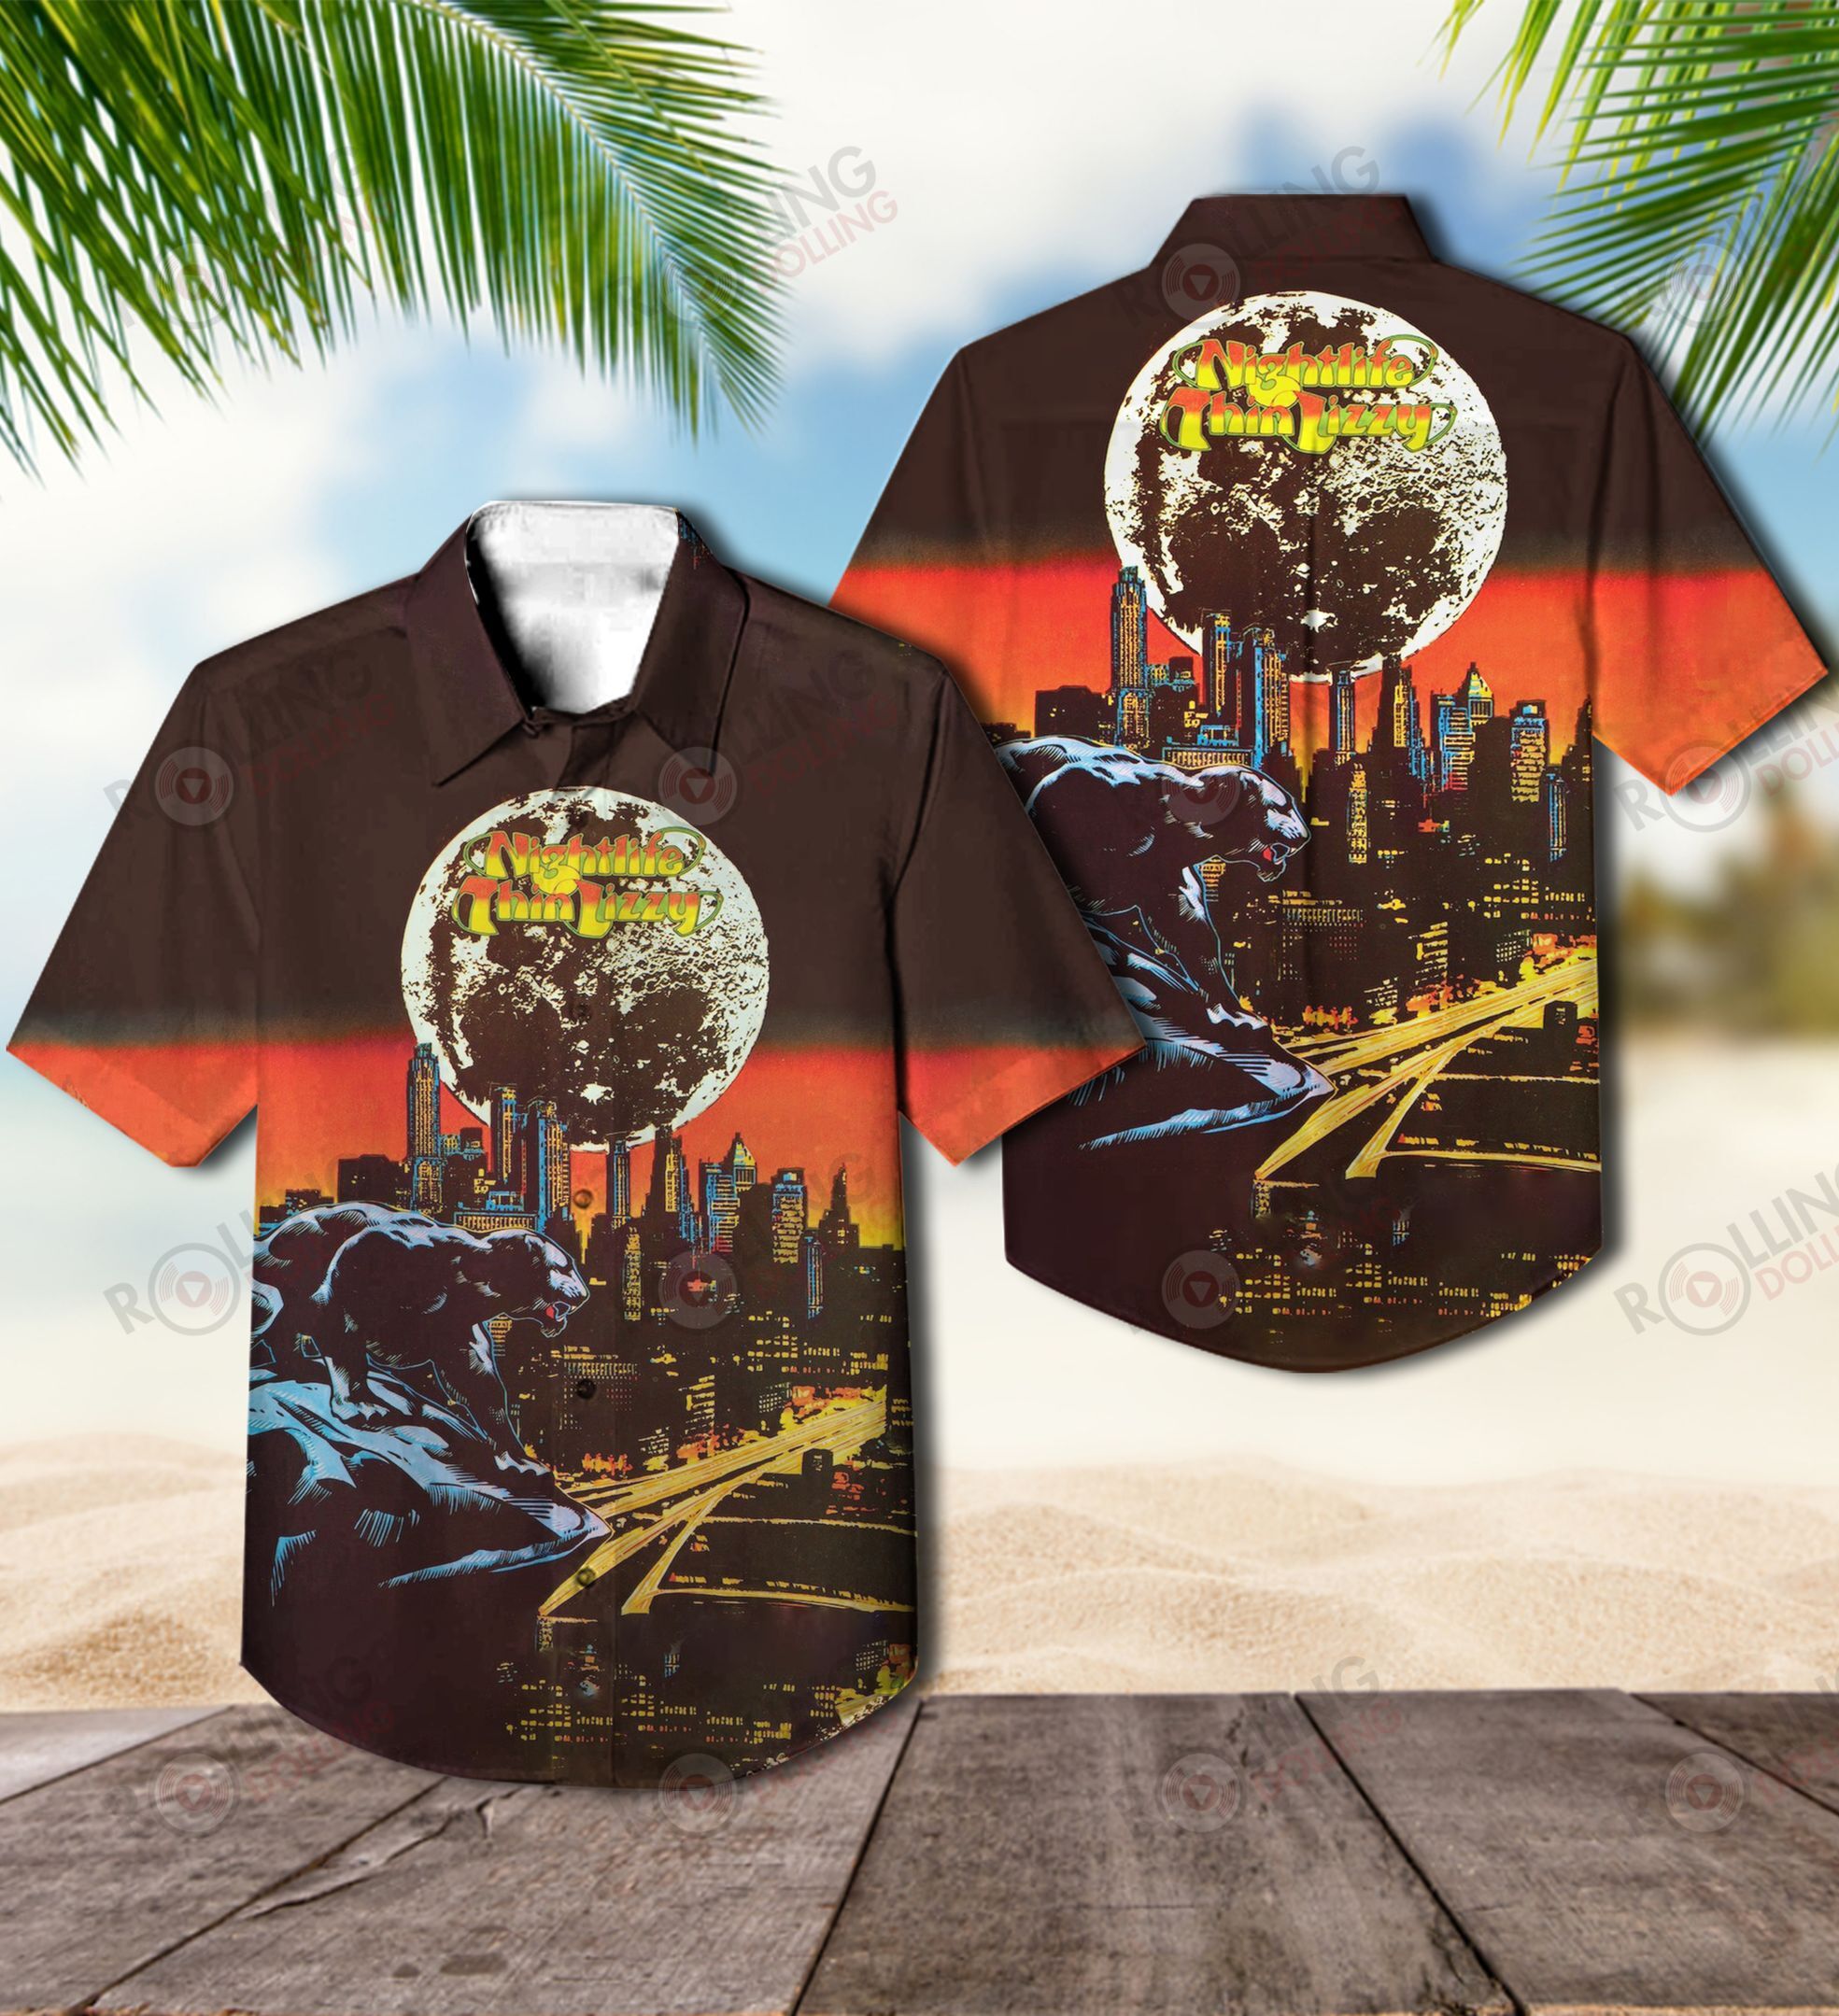 For summer, consider wearing This Amazing Hawaiian Shirt shirt in our store 78